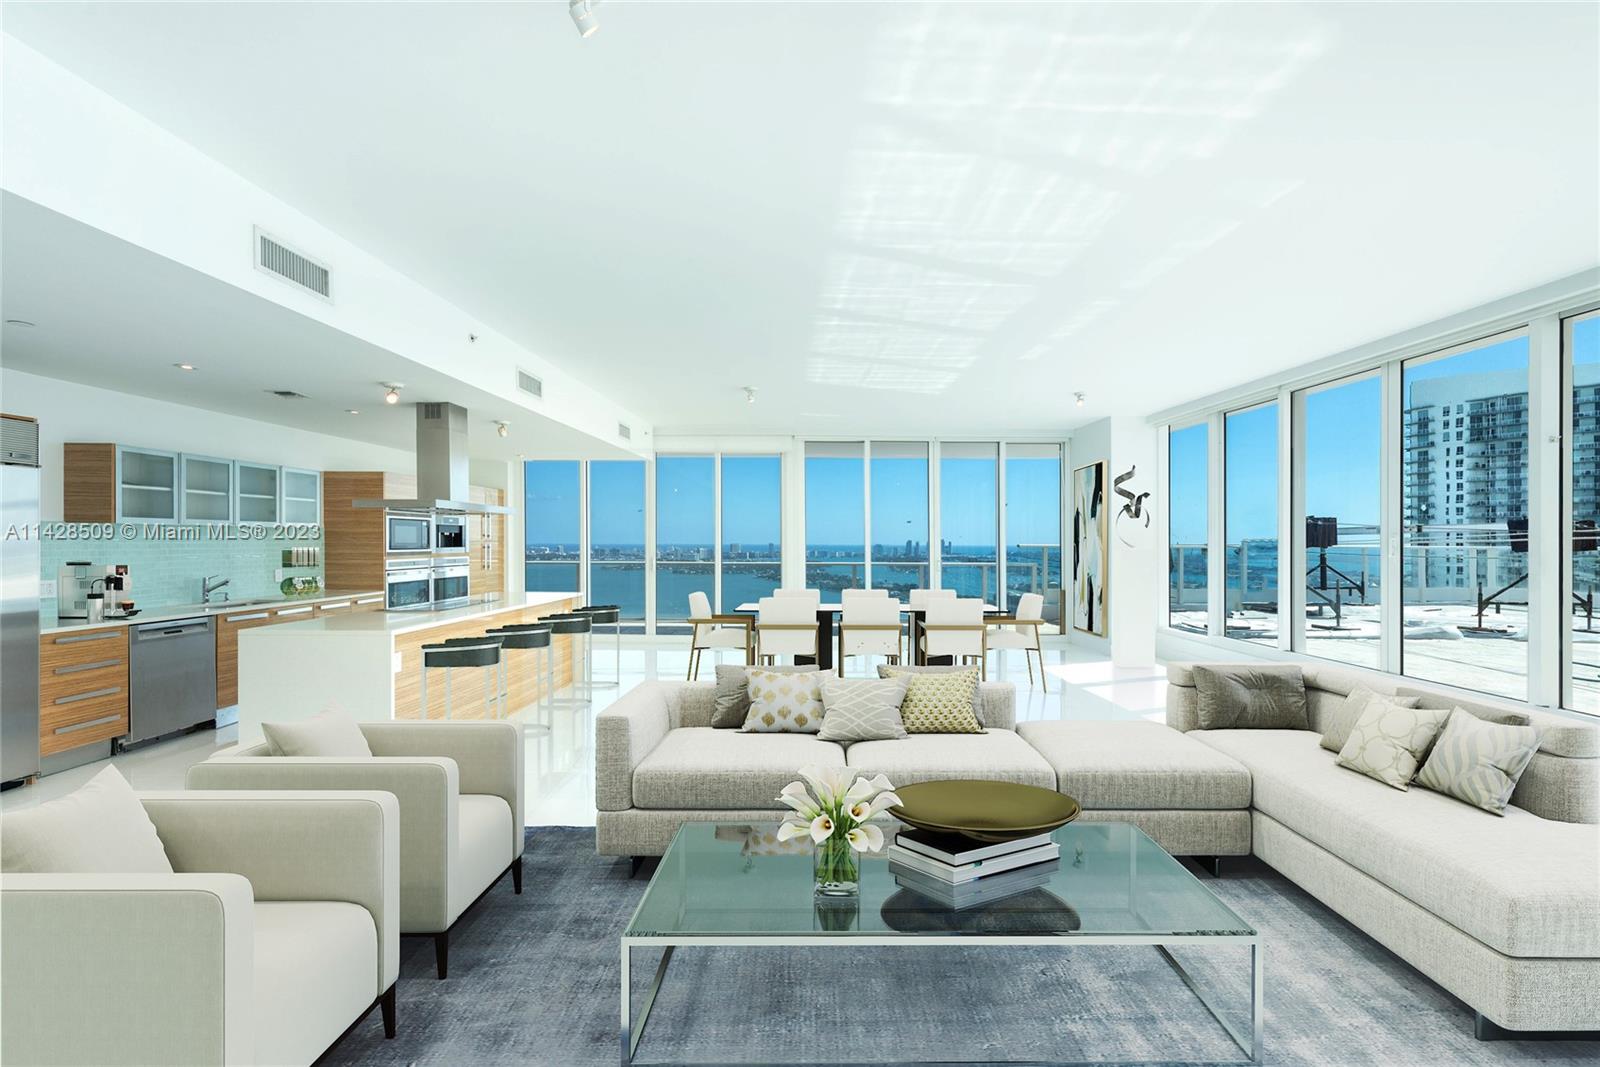 Rarely available, modern Penthouse in Paramount Bay Edgewater, with a private, 2,000-sf terrace offering incredible views of Biscayne Bay, Downtown Miami skyline, and western sunset views. This immense, 5-bedroom 5.5-bath luxe residence features floor-to-ceiling glass walls that allow maximum exposure of panoramic water and city views throughout all living spaces, open concept gourmet kitchen, oversized bedrooms with en-suite baths and walk-in closets, private elevator, and more. Live life on the water in Miami’s trendy neighborhood, Edgewater – ideally located between Miami Design District, Midtown Miami, Downtown Miami, and Miami Beach. Paramount Bay is a luxe condominium with 2 pools, 2-story 6,000-sf fitness center with spa, valet, and 24-h security. Available for lease at $23,950 Mo.